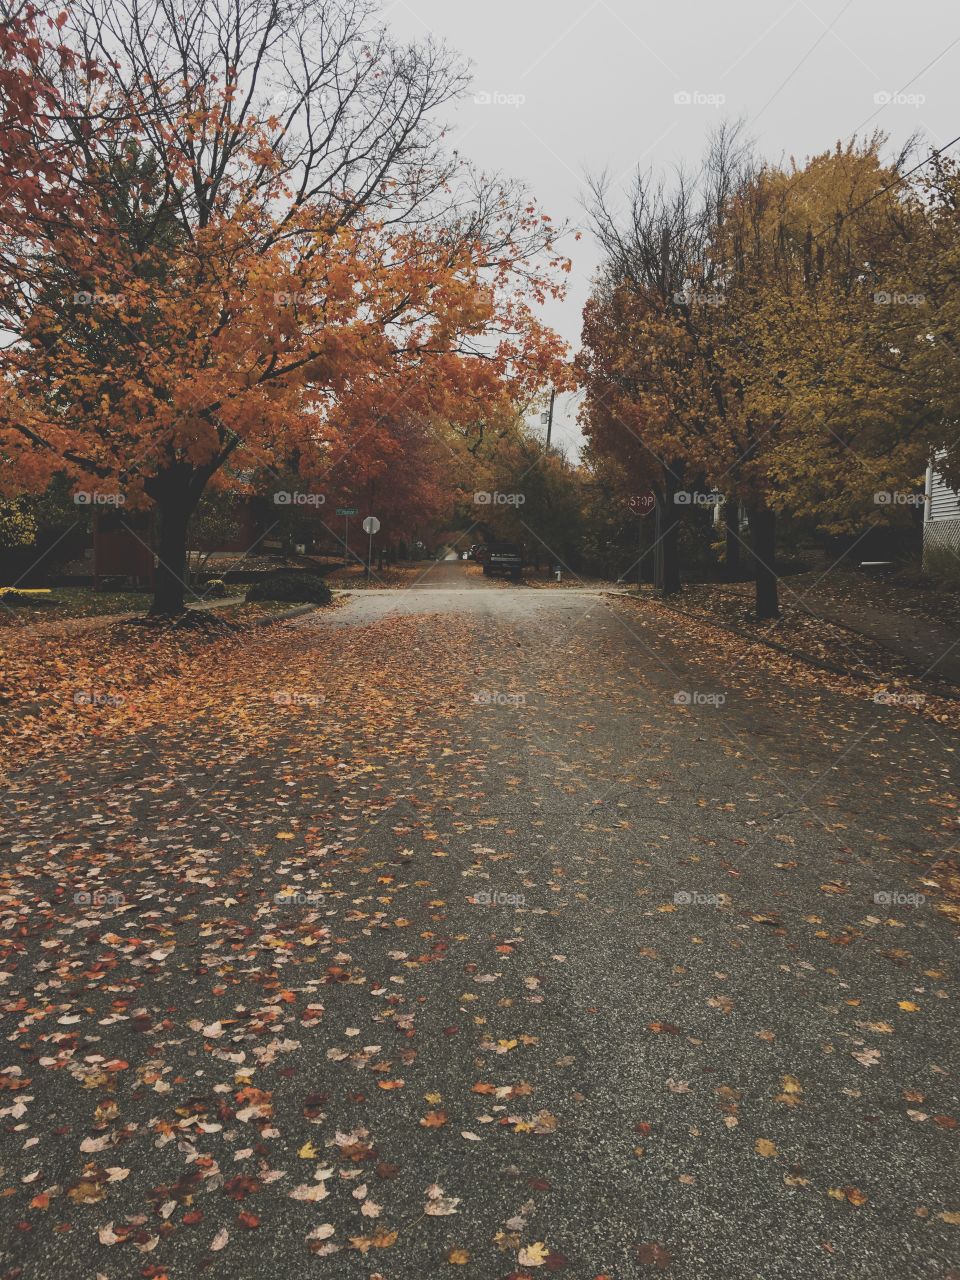 Fall vibes while walking down an urban street surrounded by trees with leaves changing color during autumn 